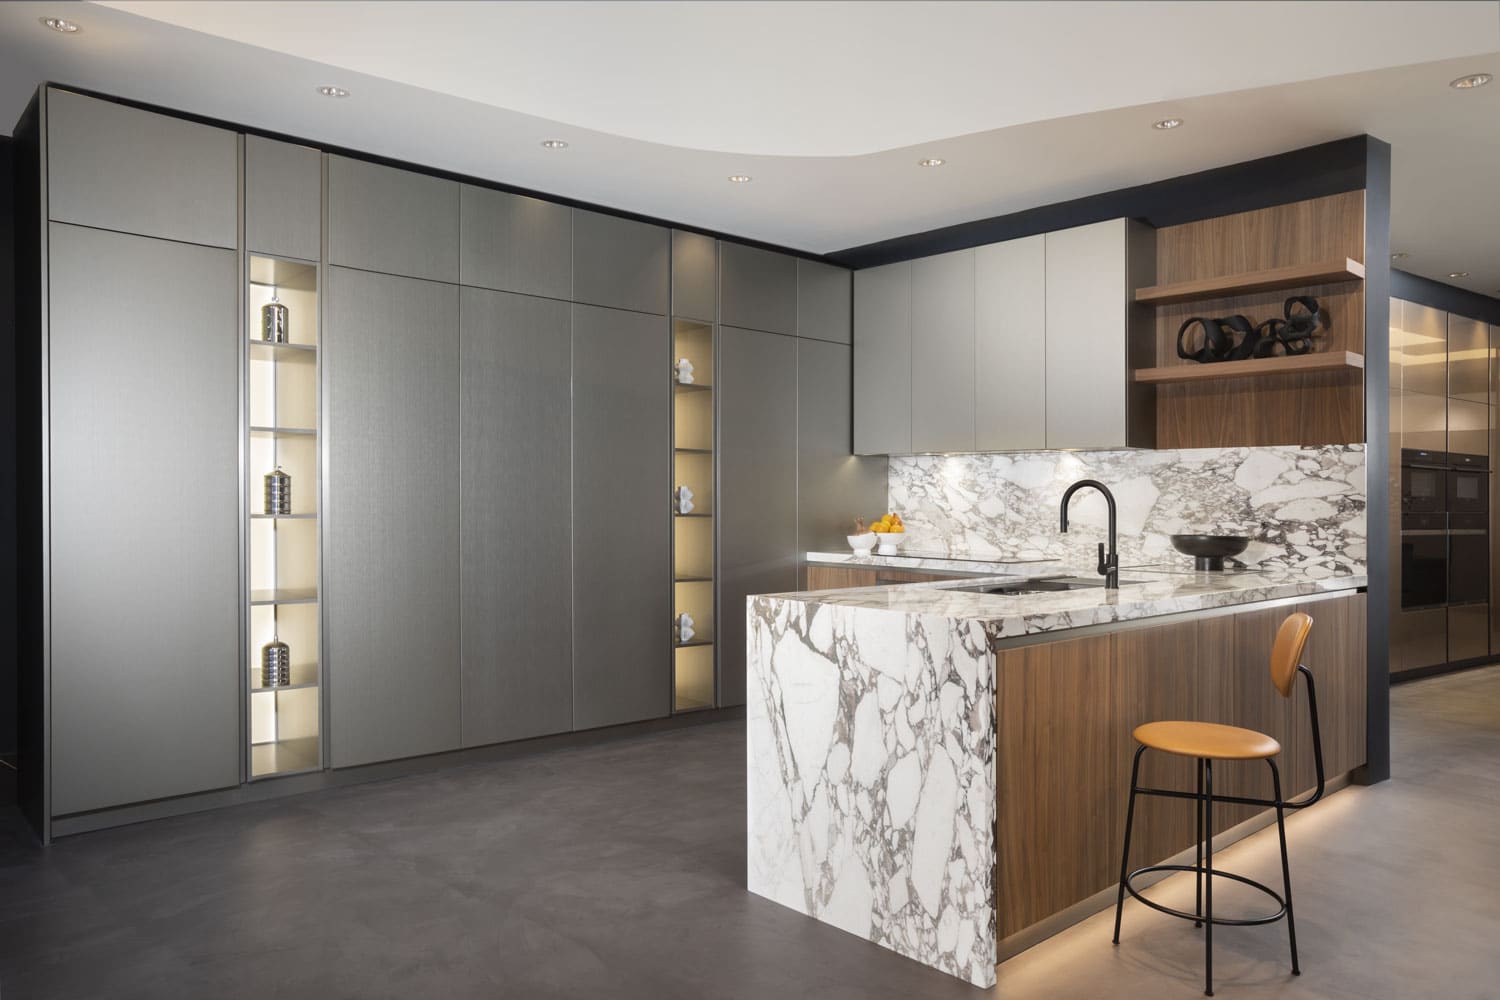 The Ambra metallic lacquer has a slightly satined finish that plays with light and shadows to give depth to the cabinet doors. 